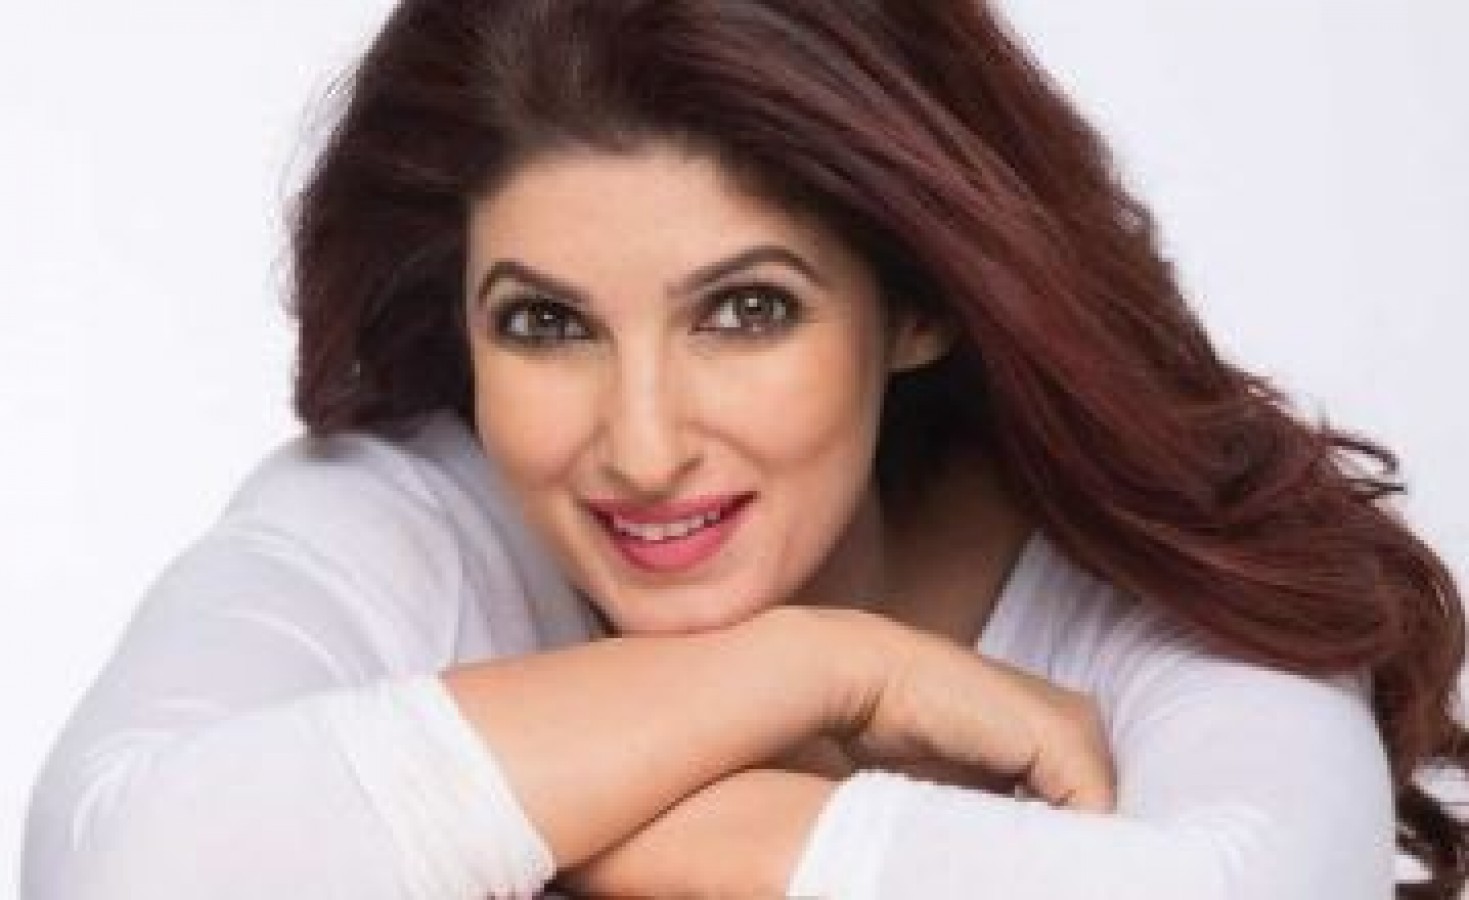 Twinkle Khanna Xnxx Hd - Twinkle Khanna called Ranveer Singh Photo Underexposed, we are unable to  spotâ€¦ | NewsTrack English 1